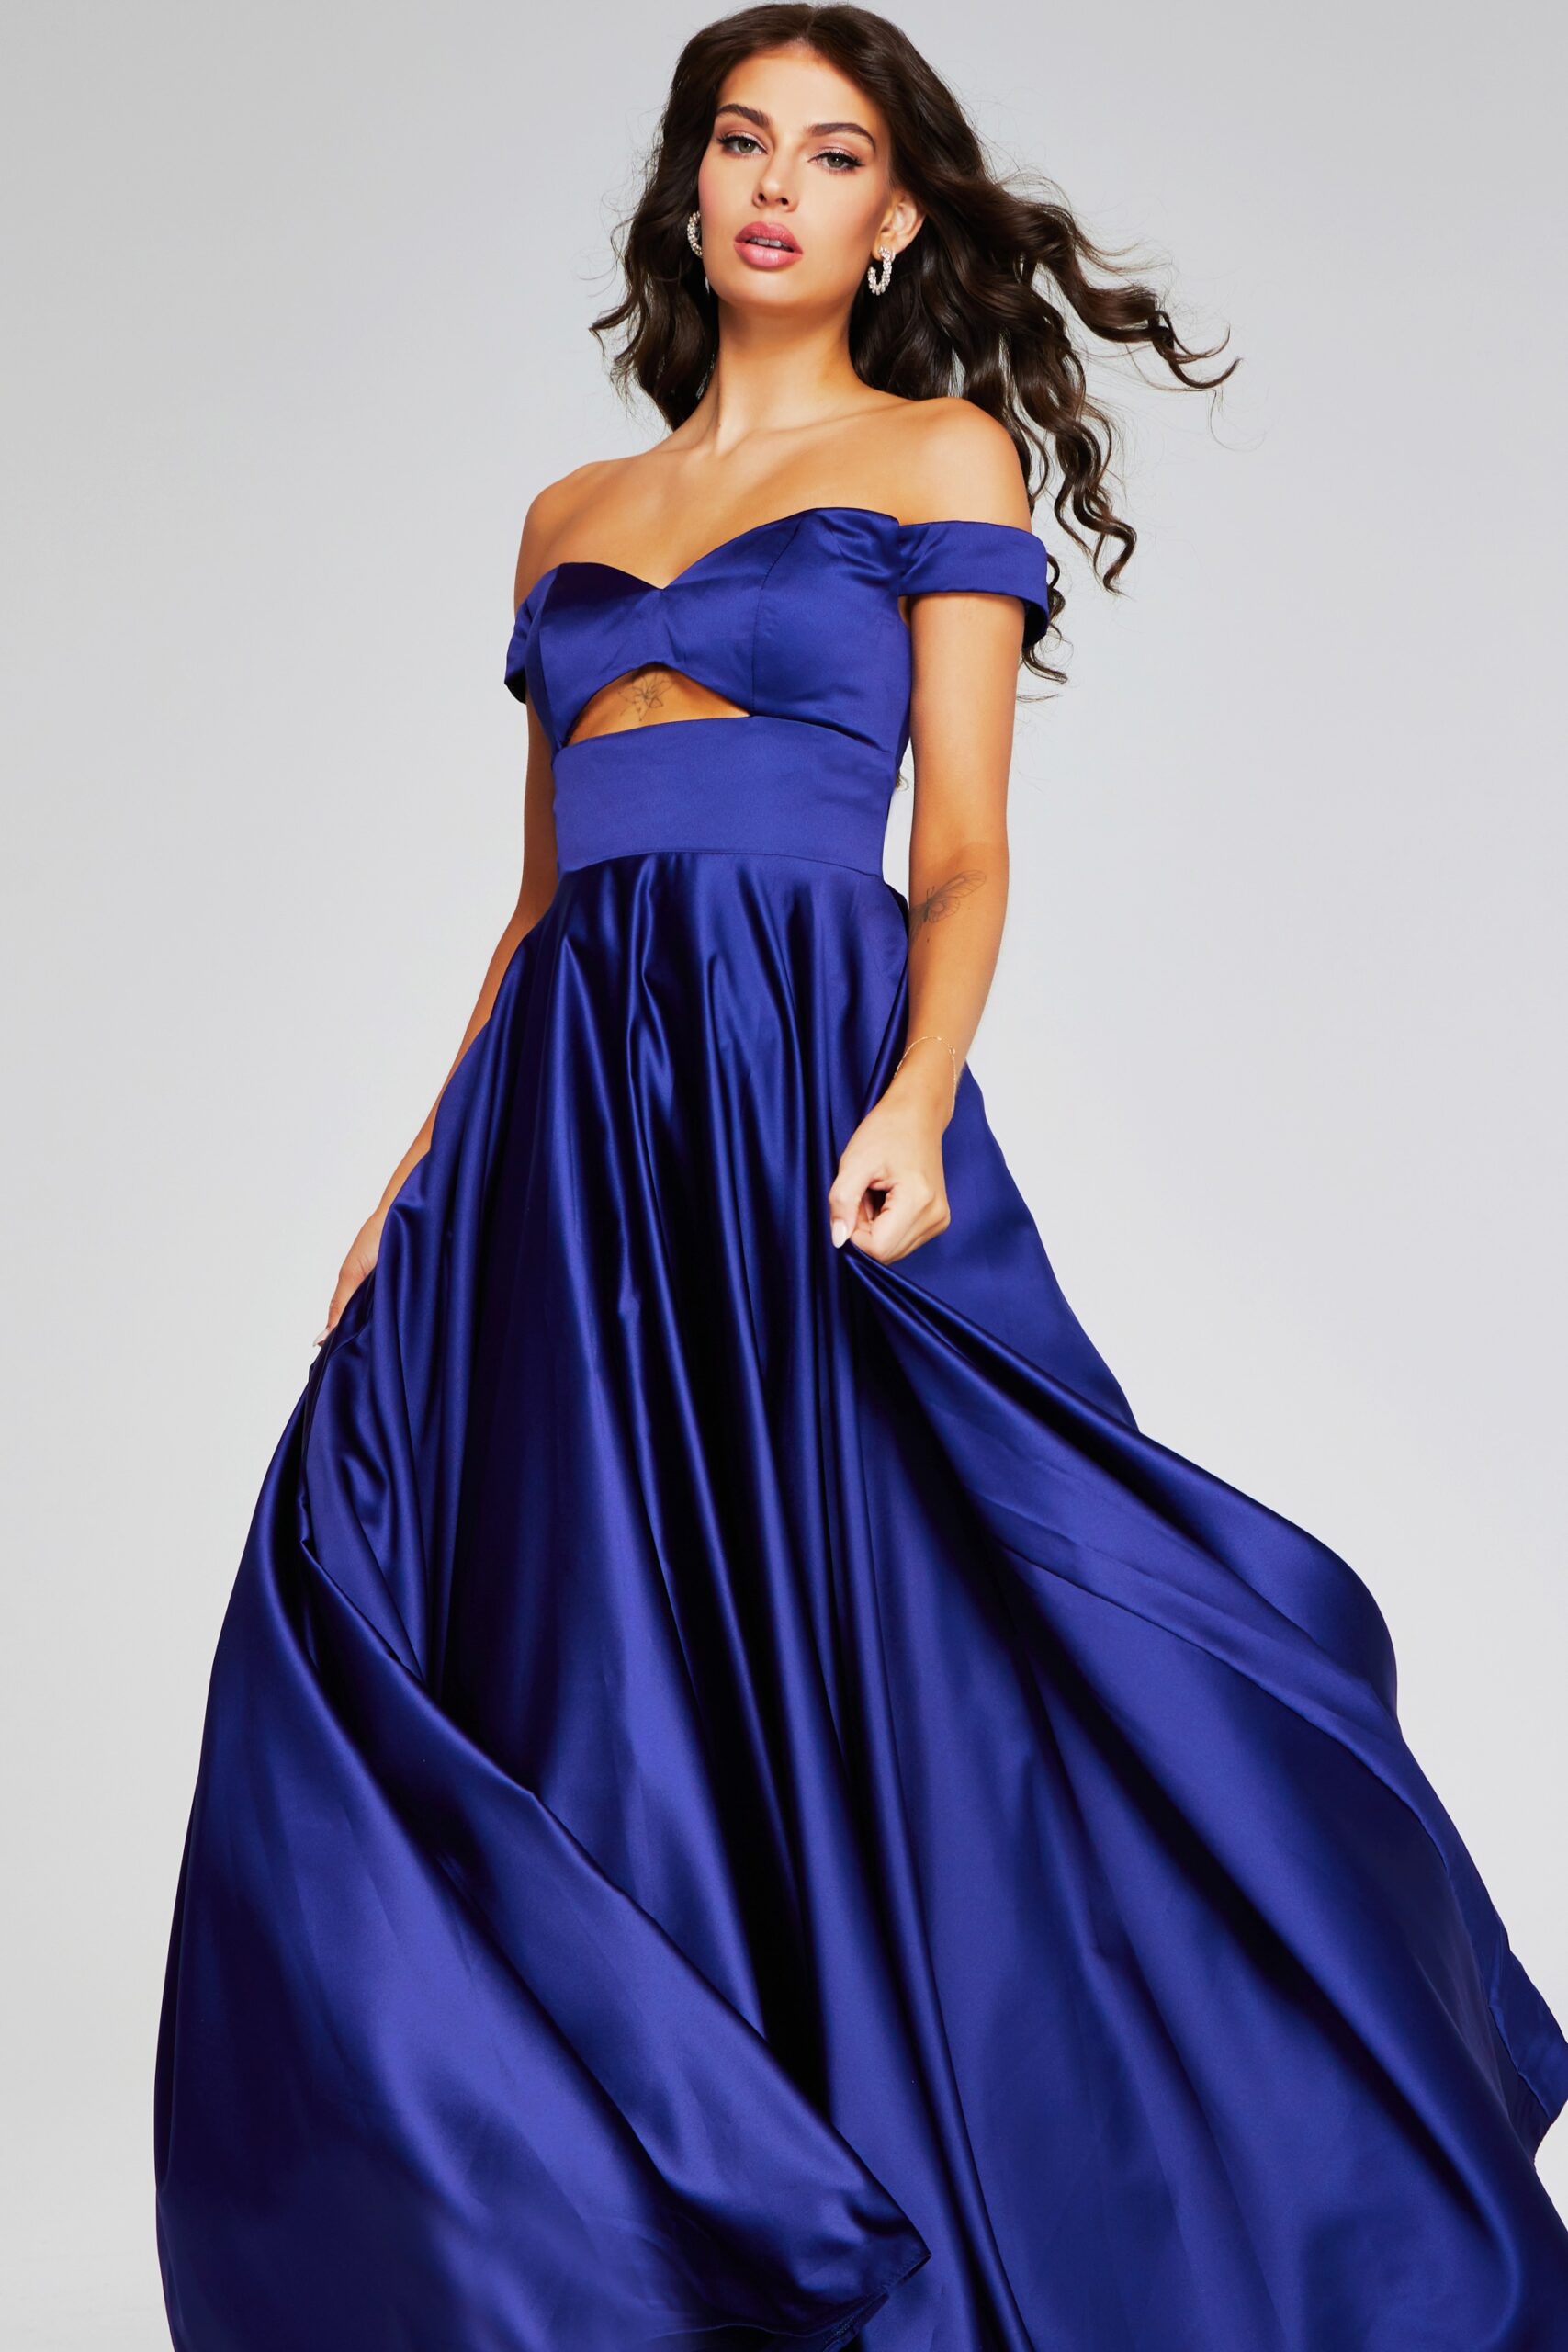 Model wearing Stunning Dark Purple Off-Shoulder Gown with Cutout Detail 40787